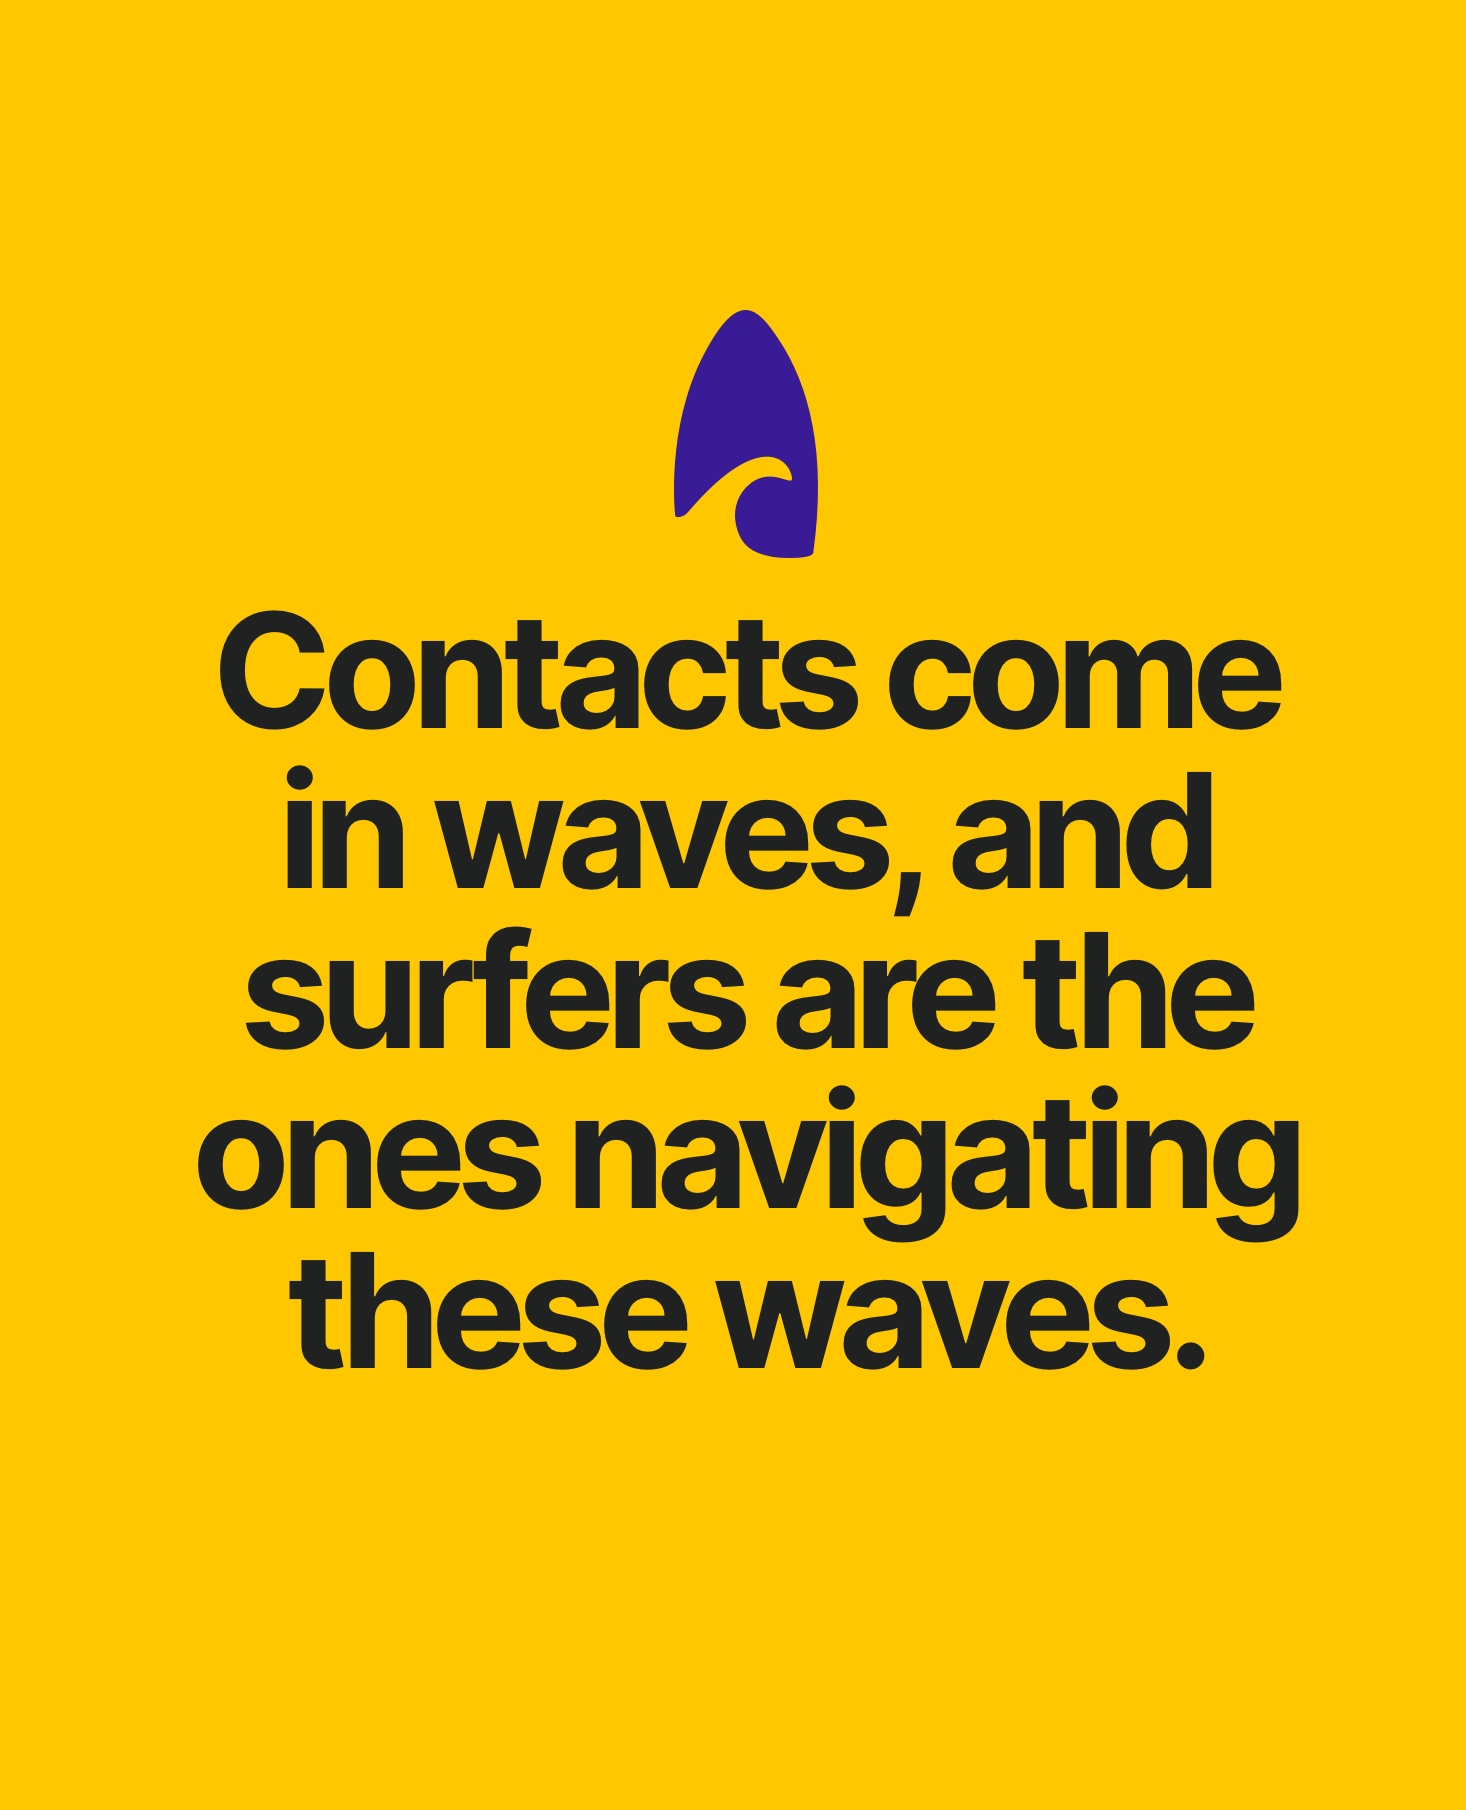 “Contacts come in waves, and. surfers are the ones navigating these waves.” sits under a navy surfboard on a yellow background